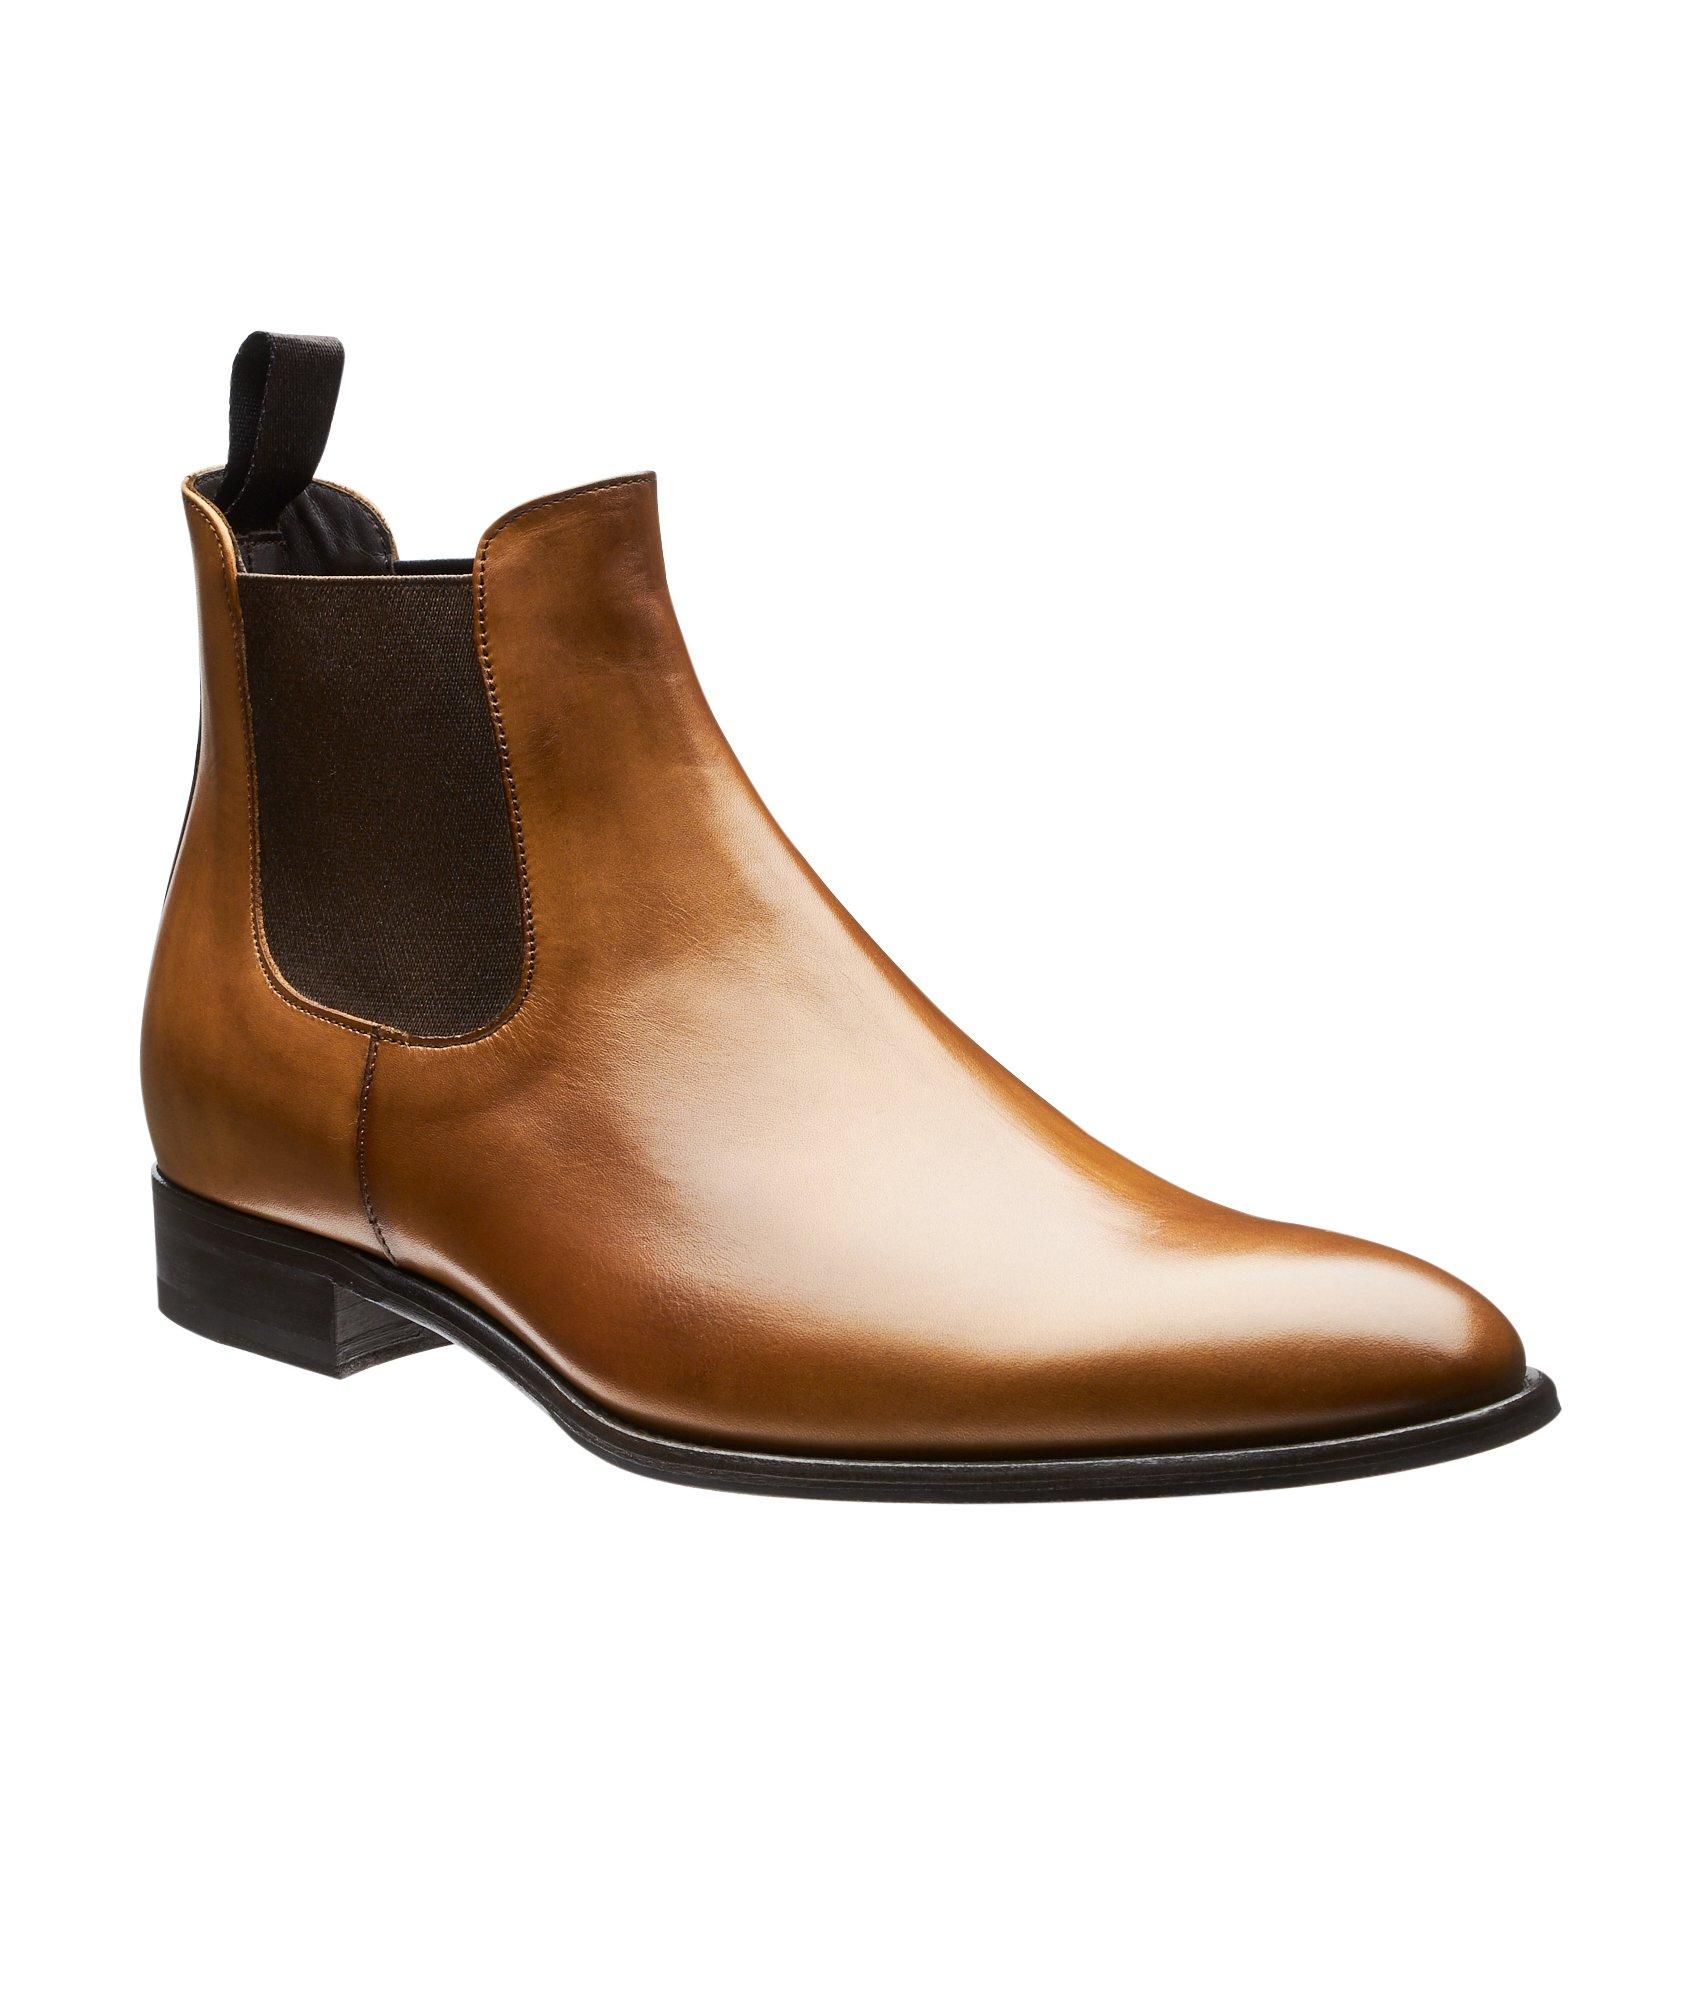 Shelby Calfskin Chelsea Boots image 0